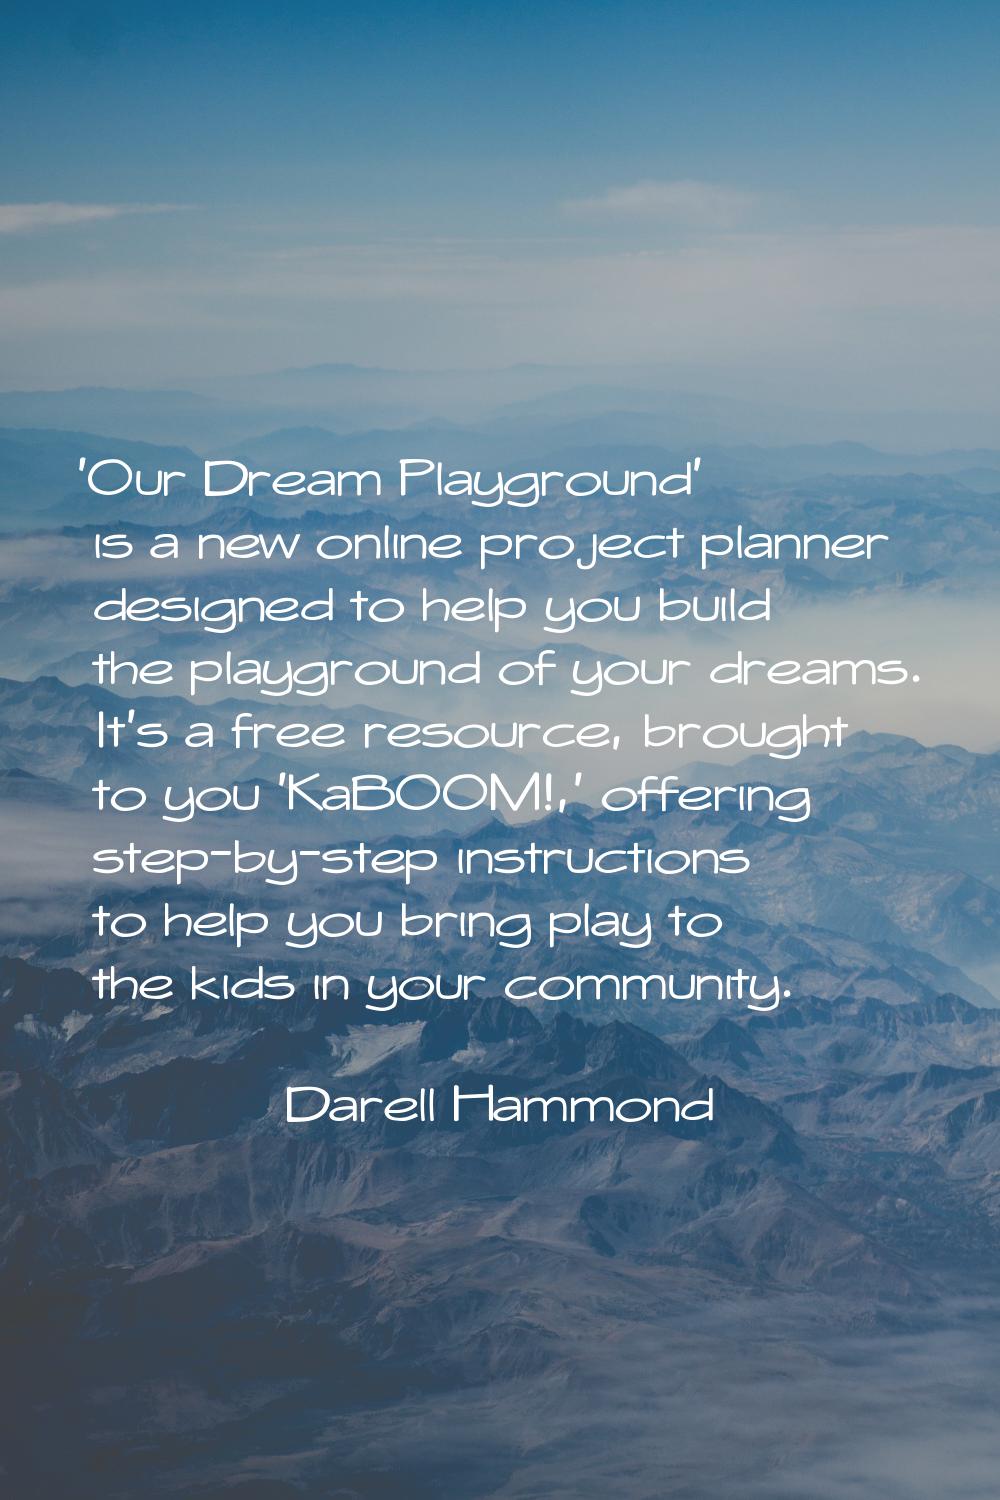 'Our Dream Playground' is a new online project planner designed to help you build the playground of